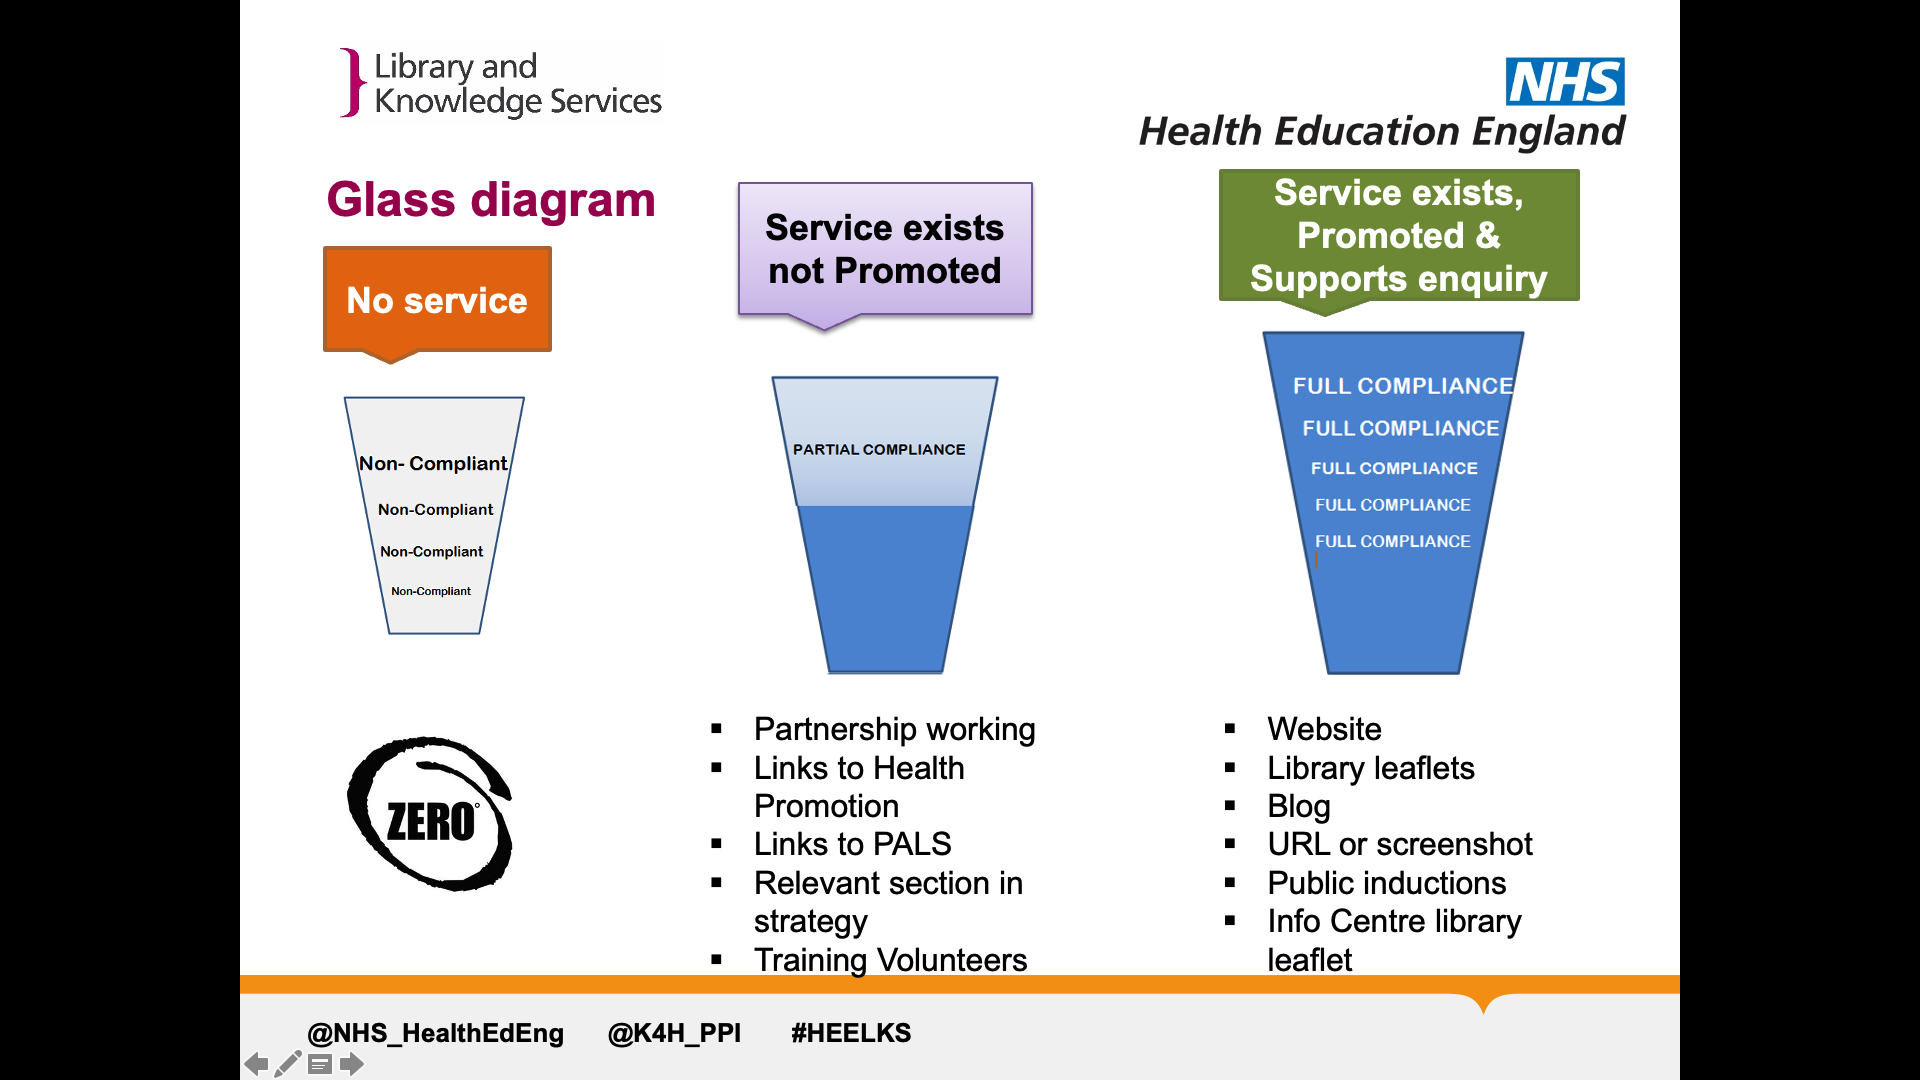 Title: Glass Diagram. On page image of three glasses. The first glass is empty. It is labelled non-compliant as there is no service given. The second glass is half full and is labelled partial compliance as the service exists but is not promoted. Examples given to the kind of service offered: partnership working, links to health promotion, links to PALS, relevant section in strategy, training volunteers. The final glass is full and is labelled fully compliant as the service exists, is promoted, and supports enquiry. Examples of this are: website, library leaflets, blog, URL or screenshot, public inductions, Info centre library leaflet.